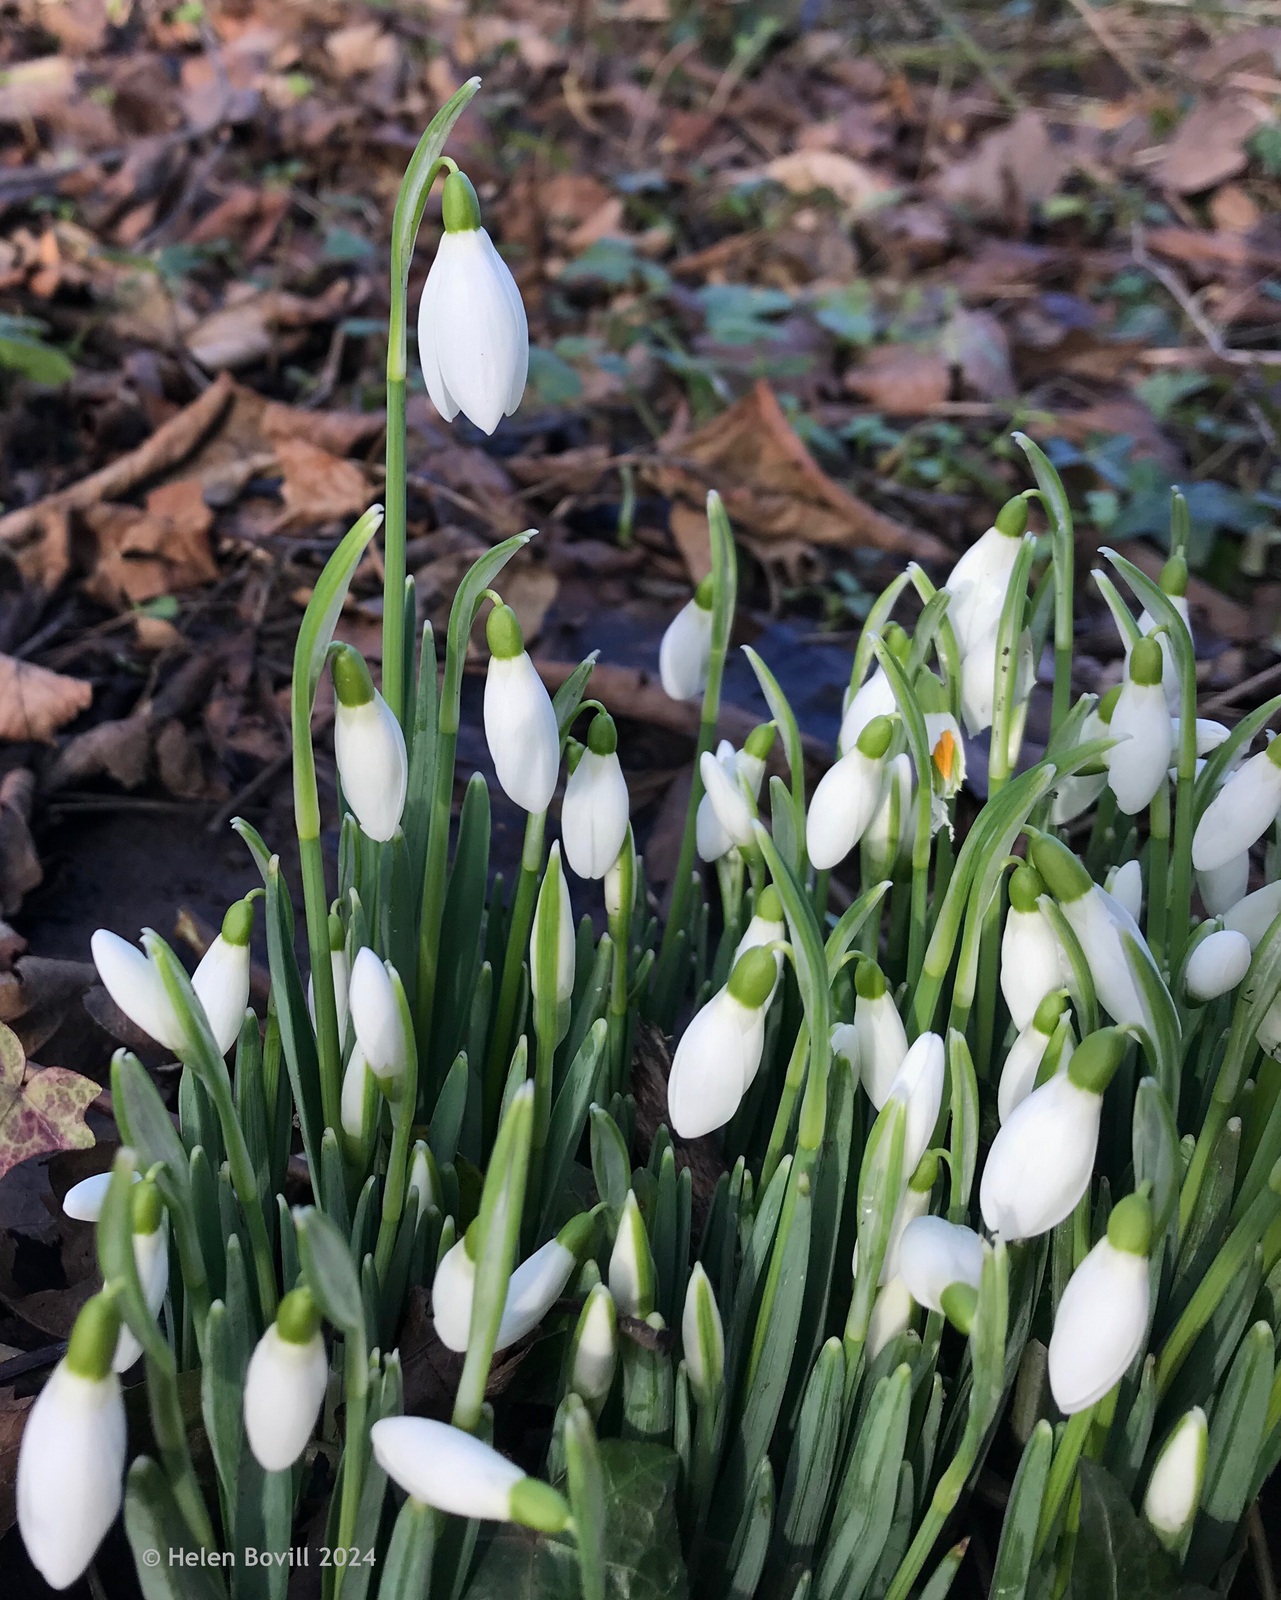 A group of snowdrops with single petals